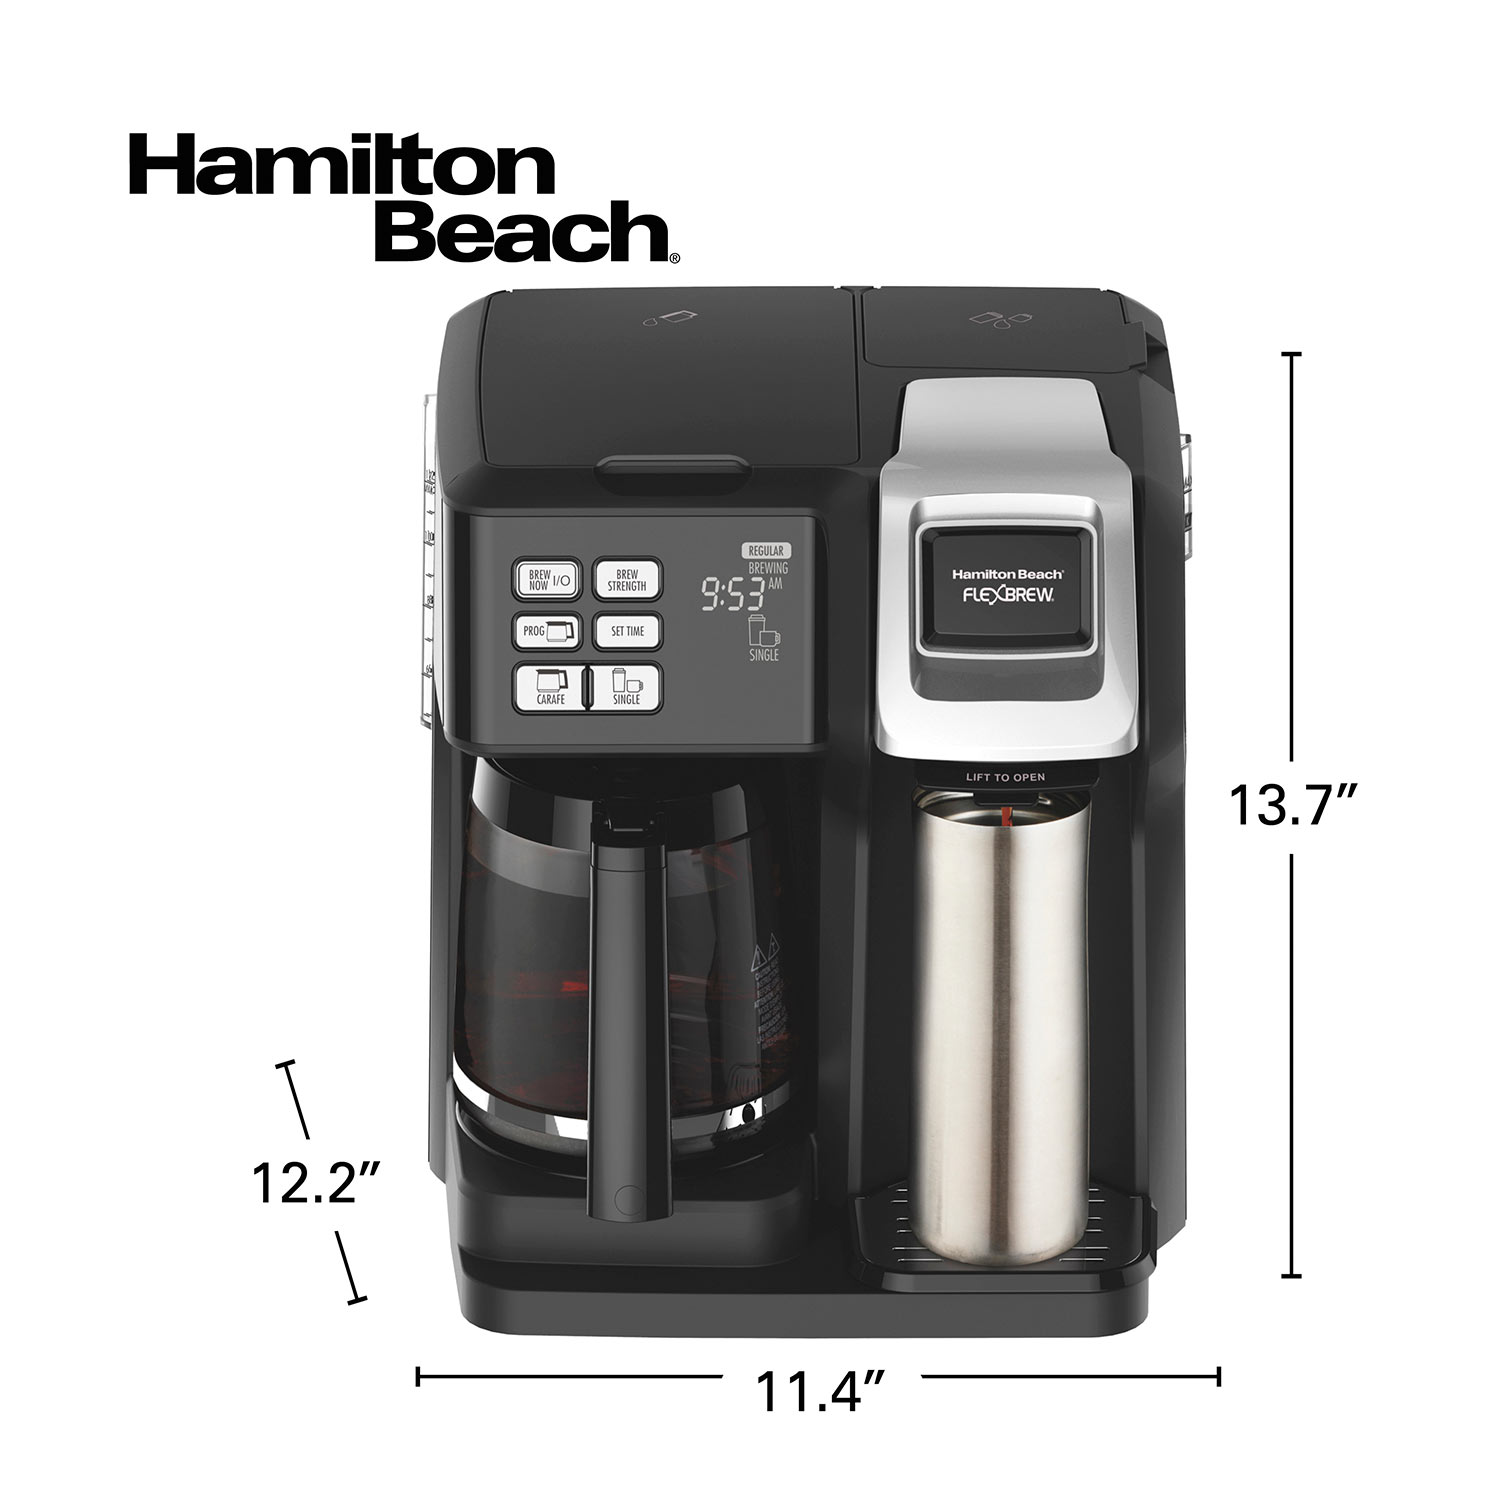 HAMILTON BEACH 2-WAY BREWER COFFEE MAKER, SINGLE SERVE AND TWELVE CUP POT -  REVIEW! 